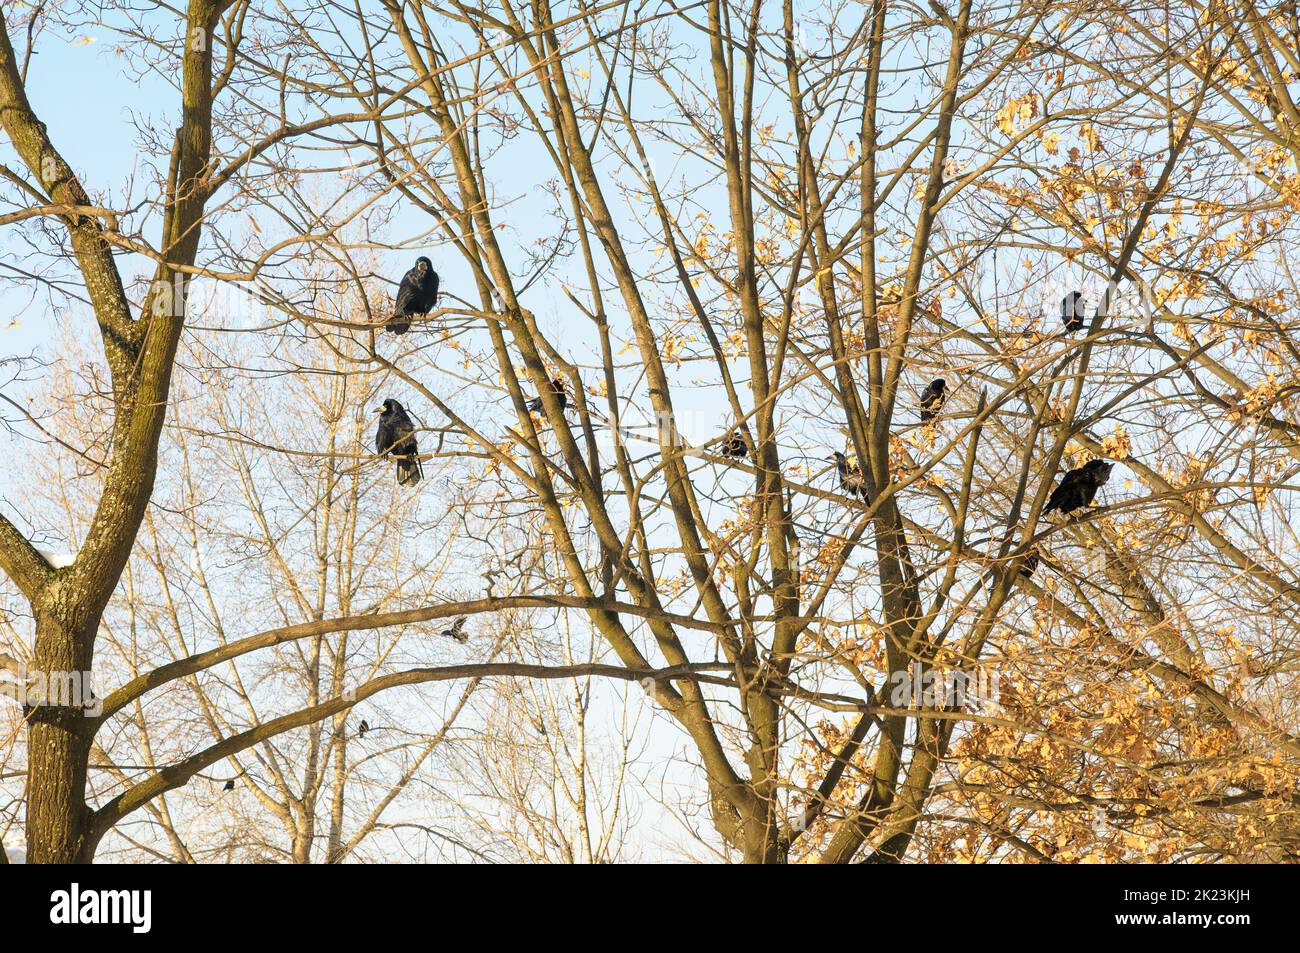 Hooded crows perched on the top of tree branches are waiting to take flight during a clear winter day Stock Photo